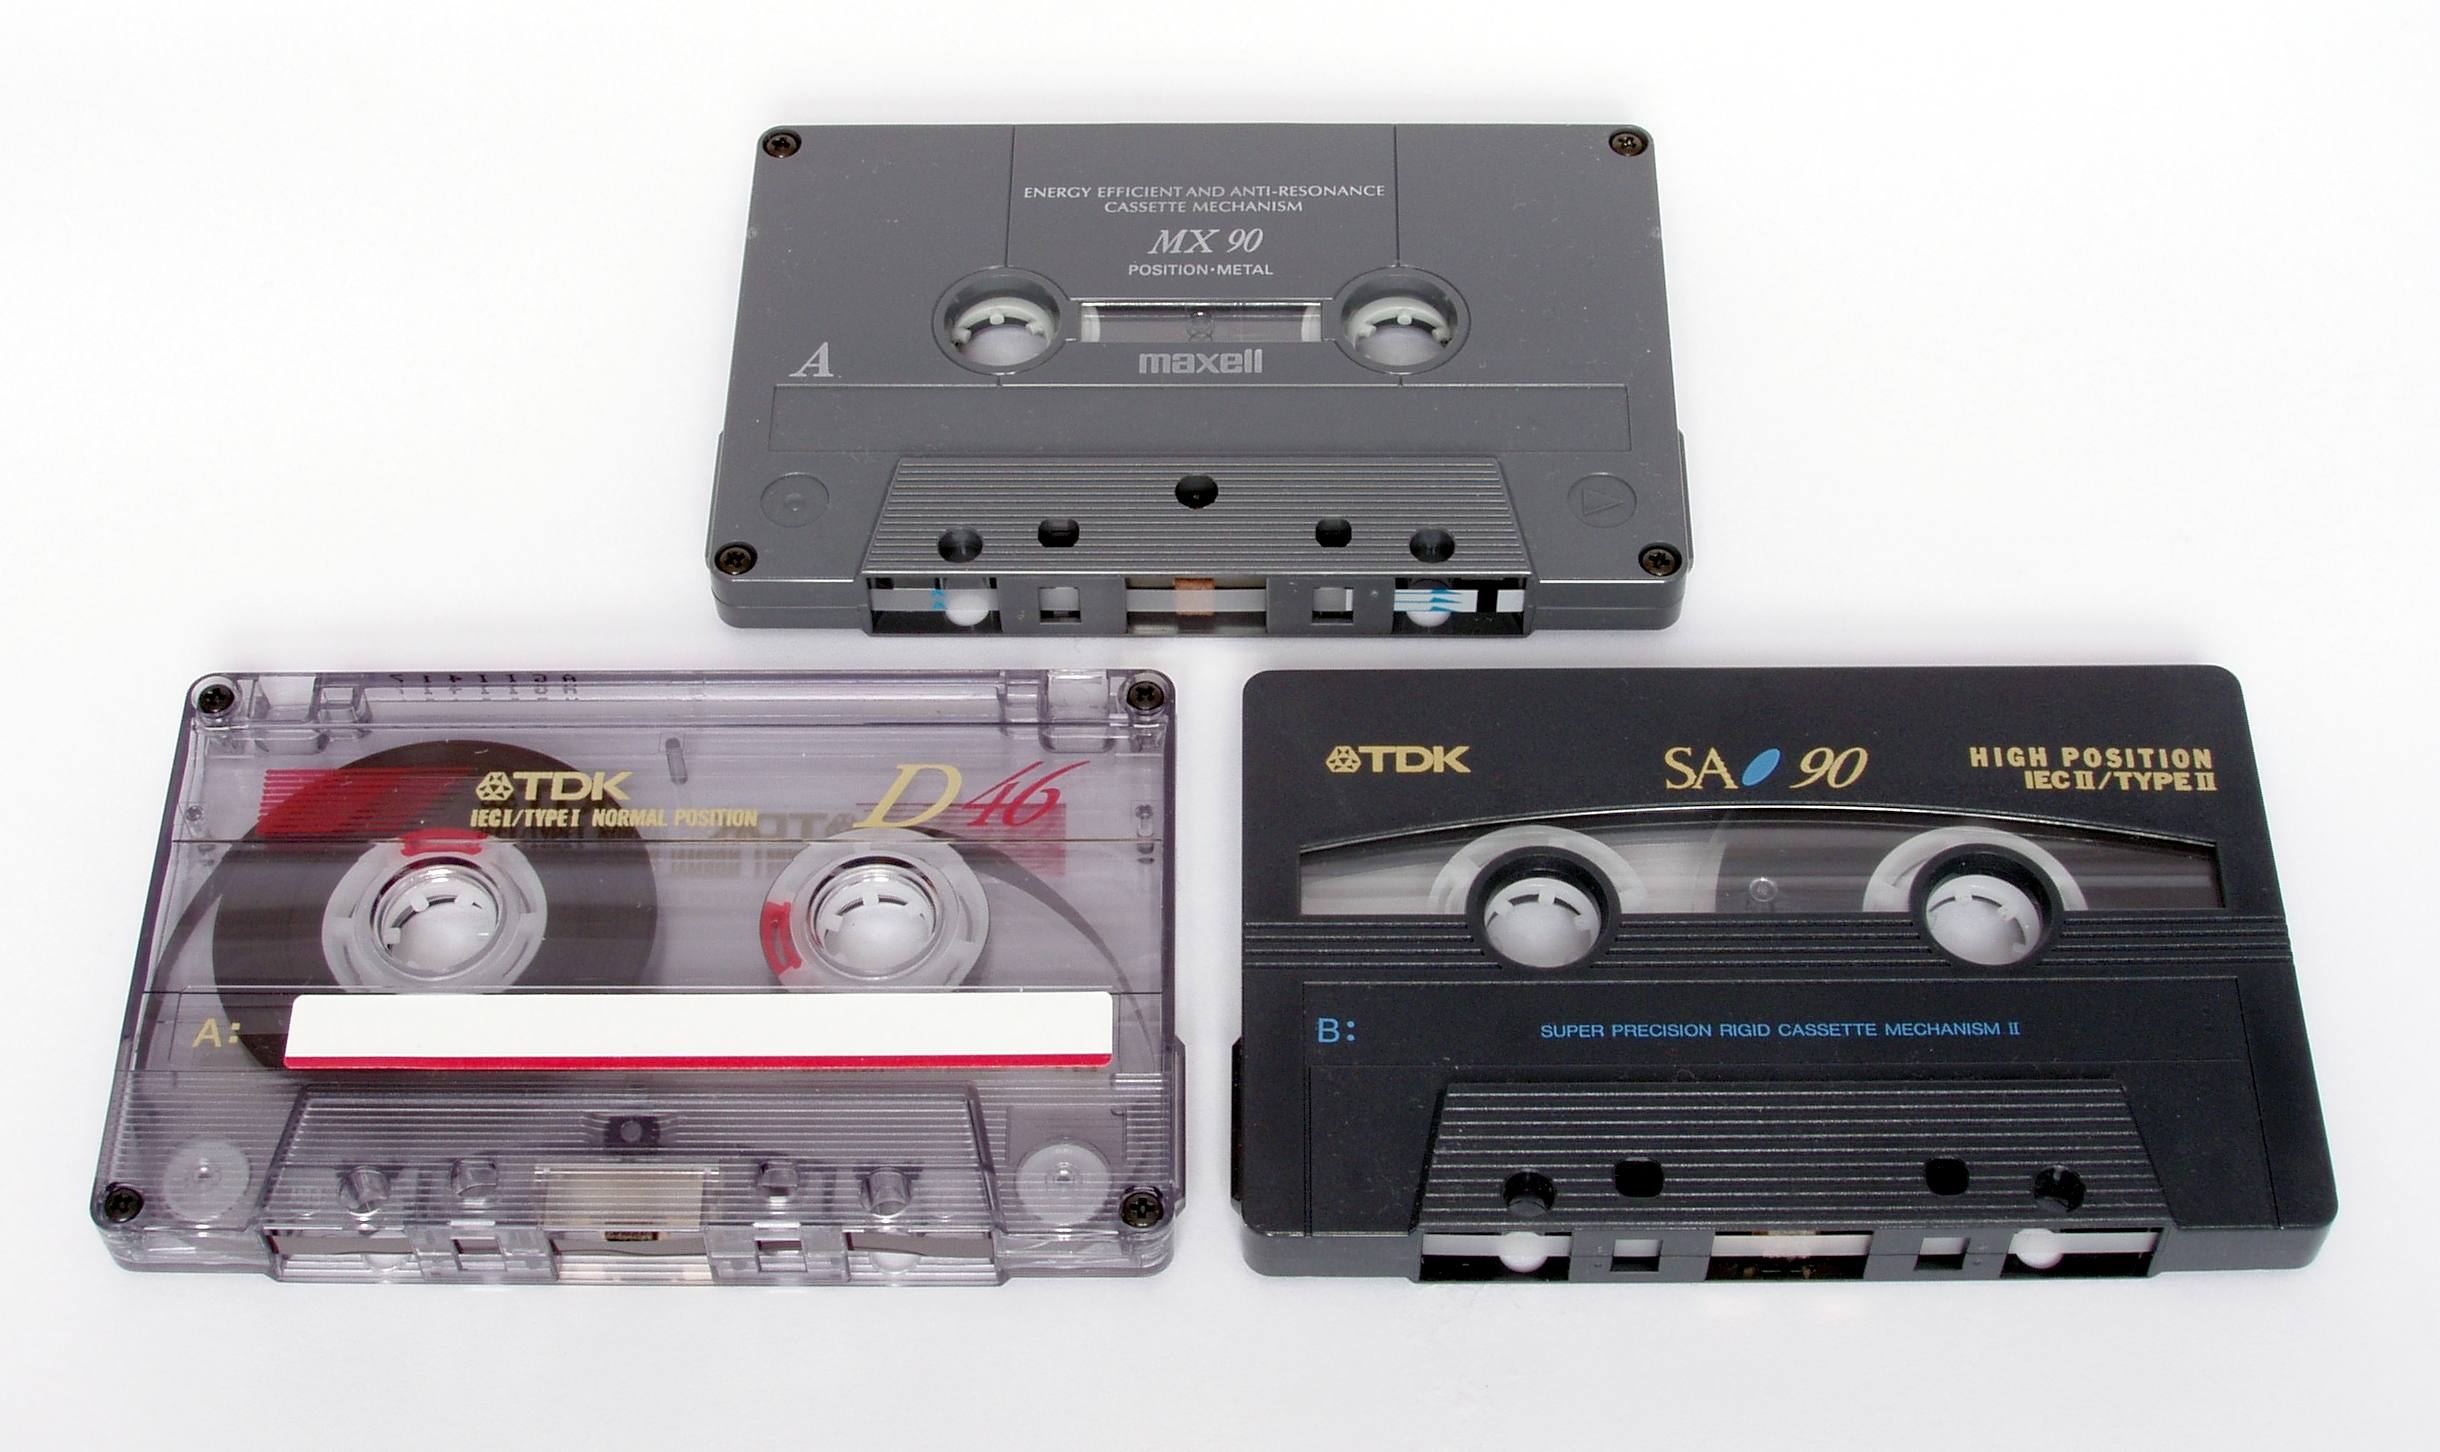 22 Obsolete Technologies That People Thought Would Last Forever